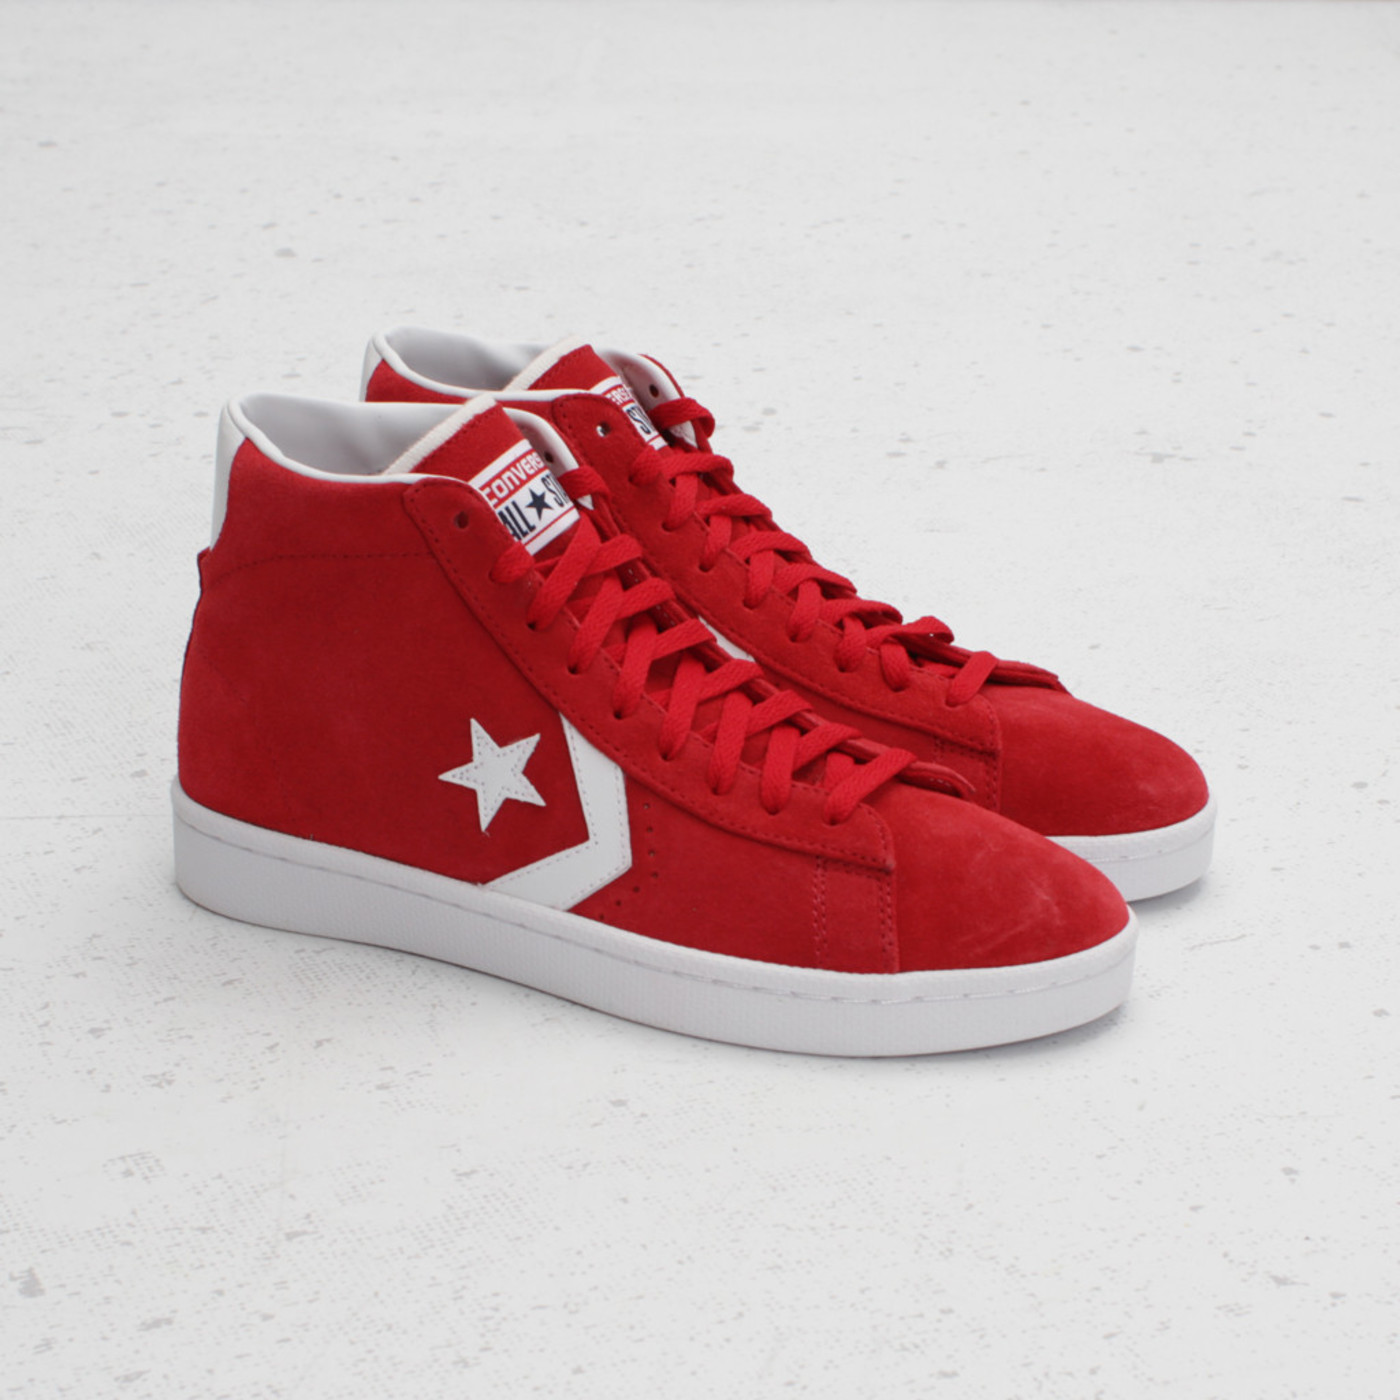 converse pro leather red